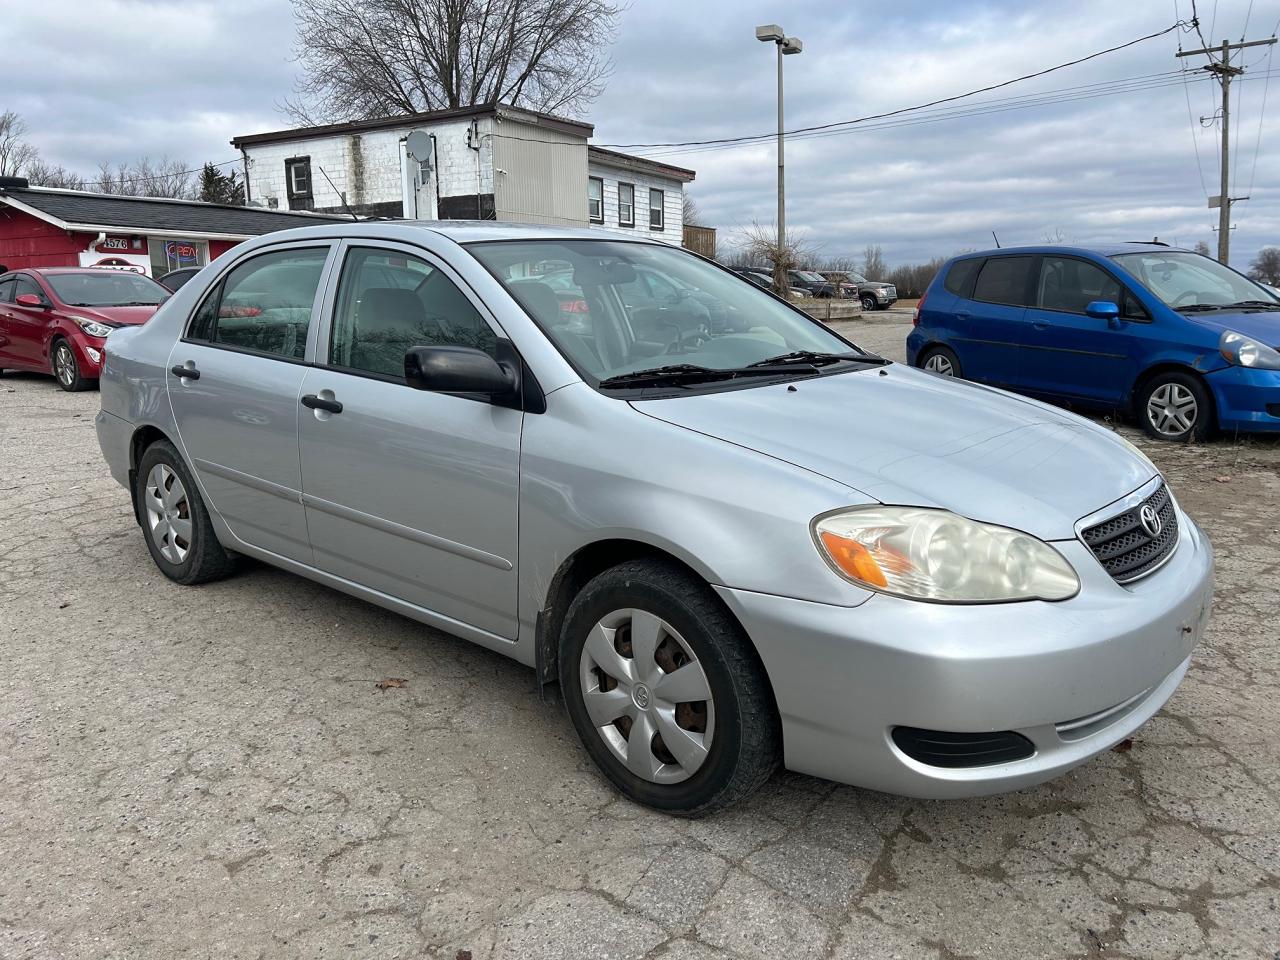 2007 Toyota Corolla CE*DRIVES GOOD*162KMS*REMOTE START*TWO SETS OF TIR - Photo #3